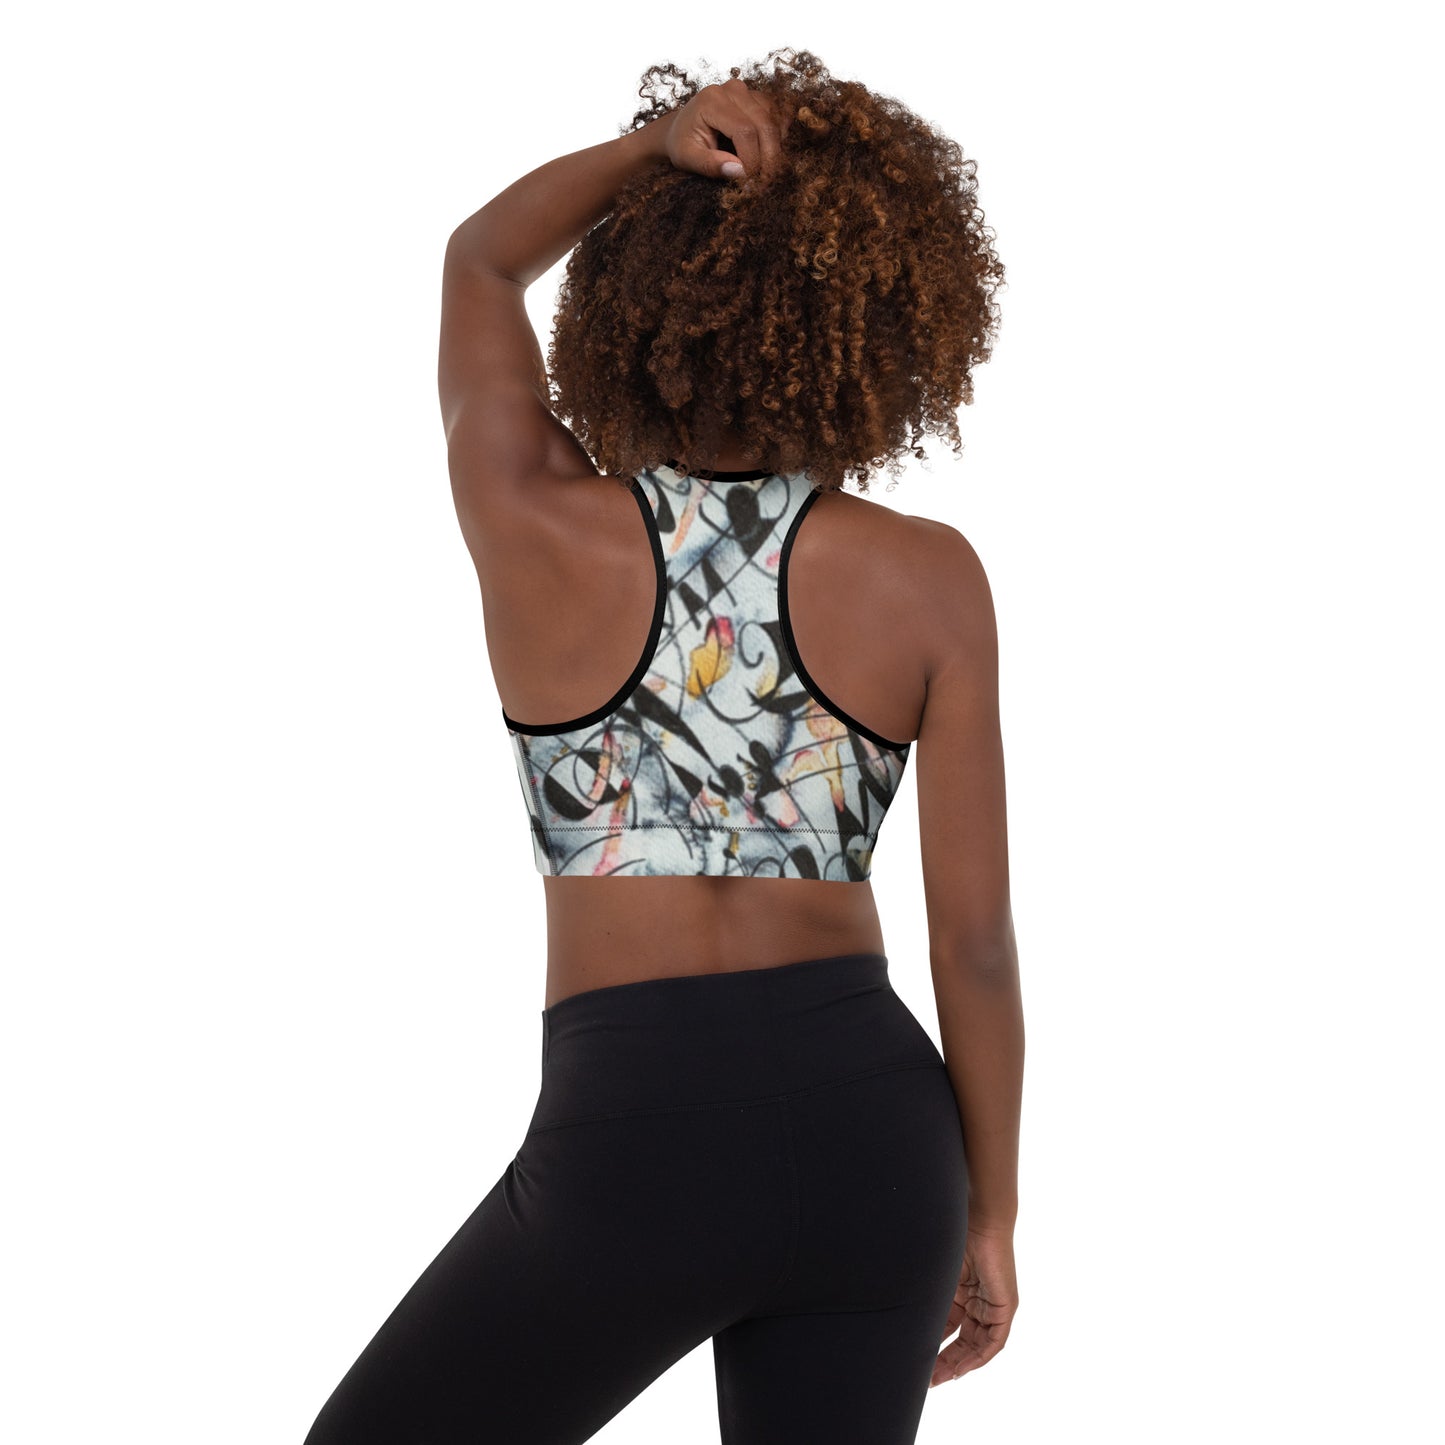 Fleeting Thoughts Abstract Padded Sports Bra - Art Love Decor